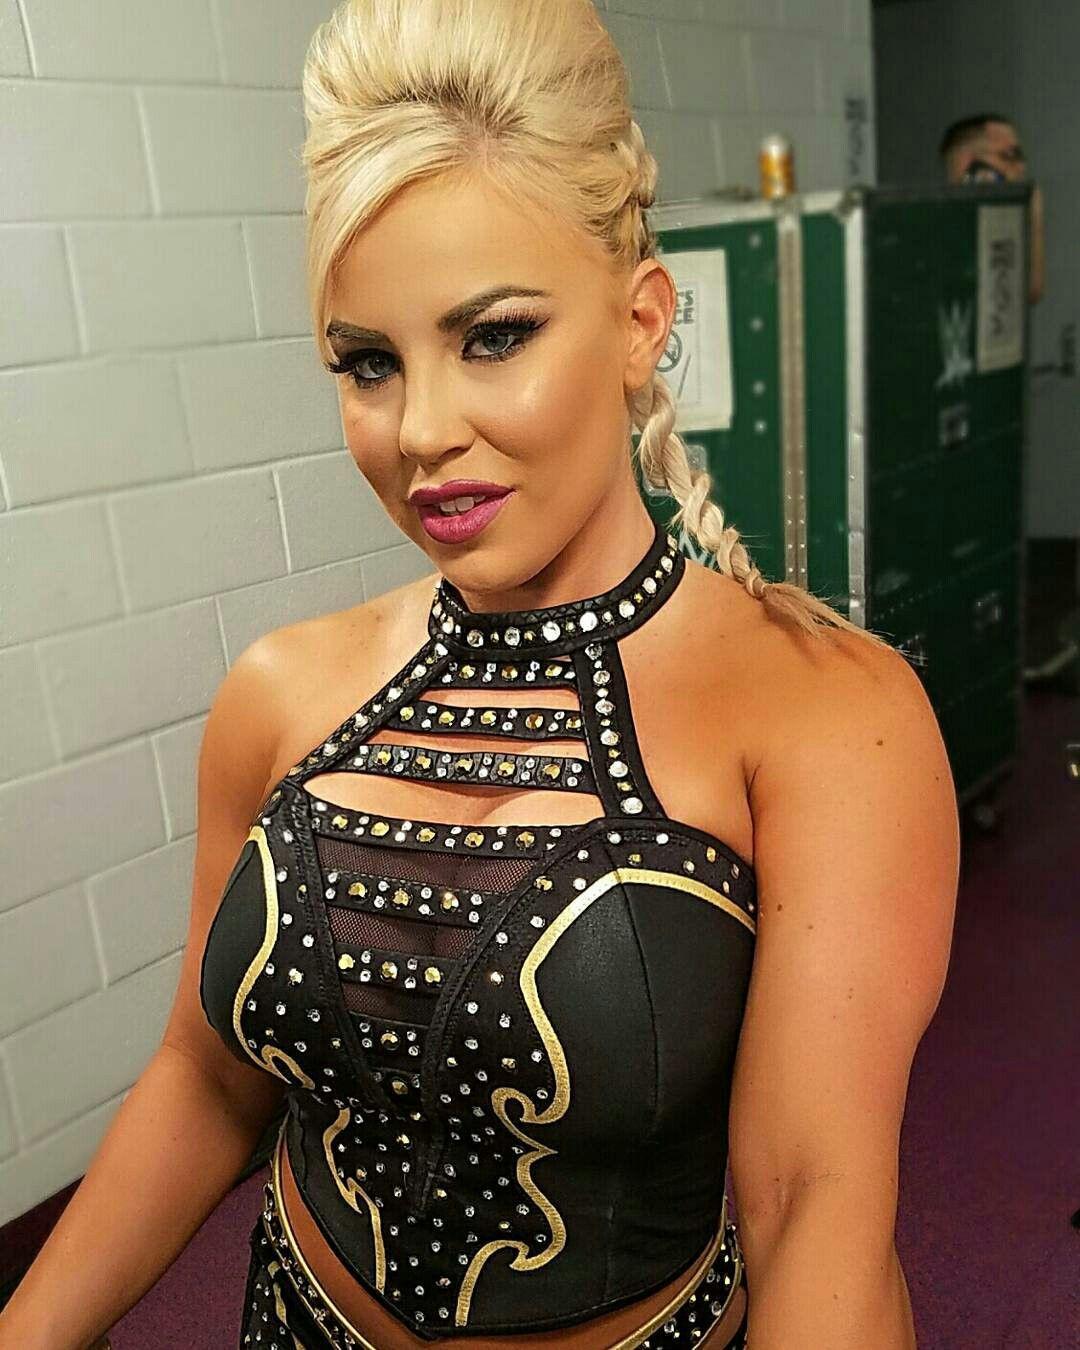 70+ Hot Pictures Of Dana Brooke Show Off This WWE Diva’s Sexy Body 476